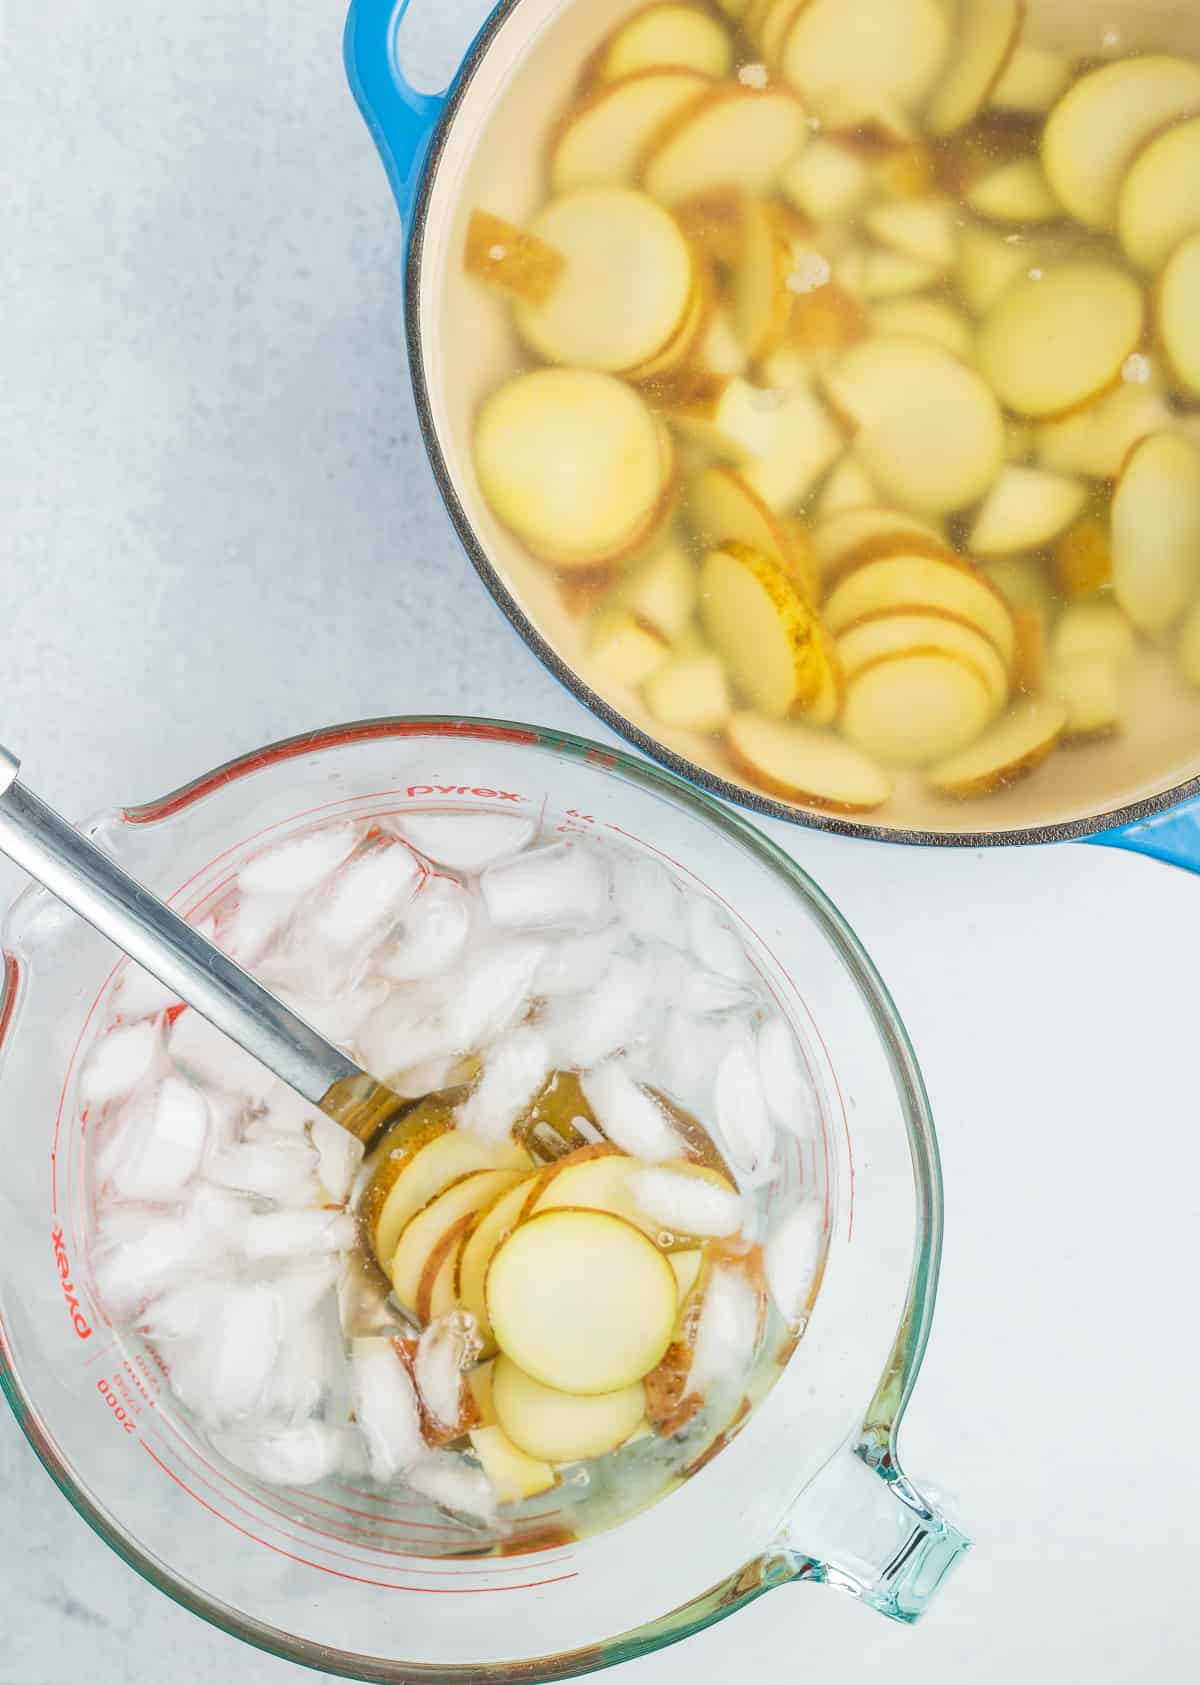 sliced potatoes in a bowl of ice water.